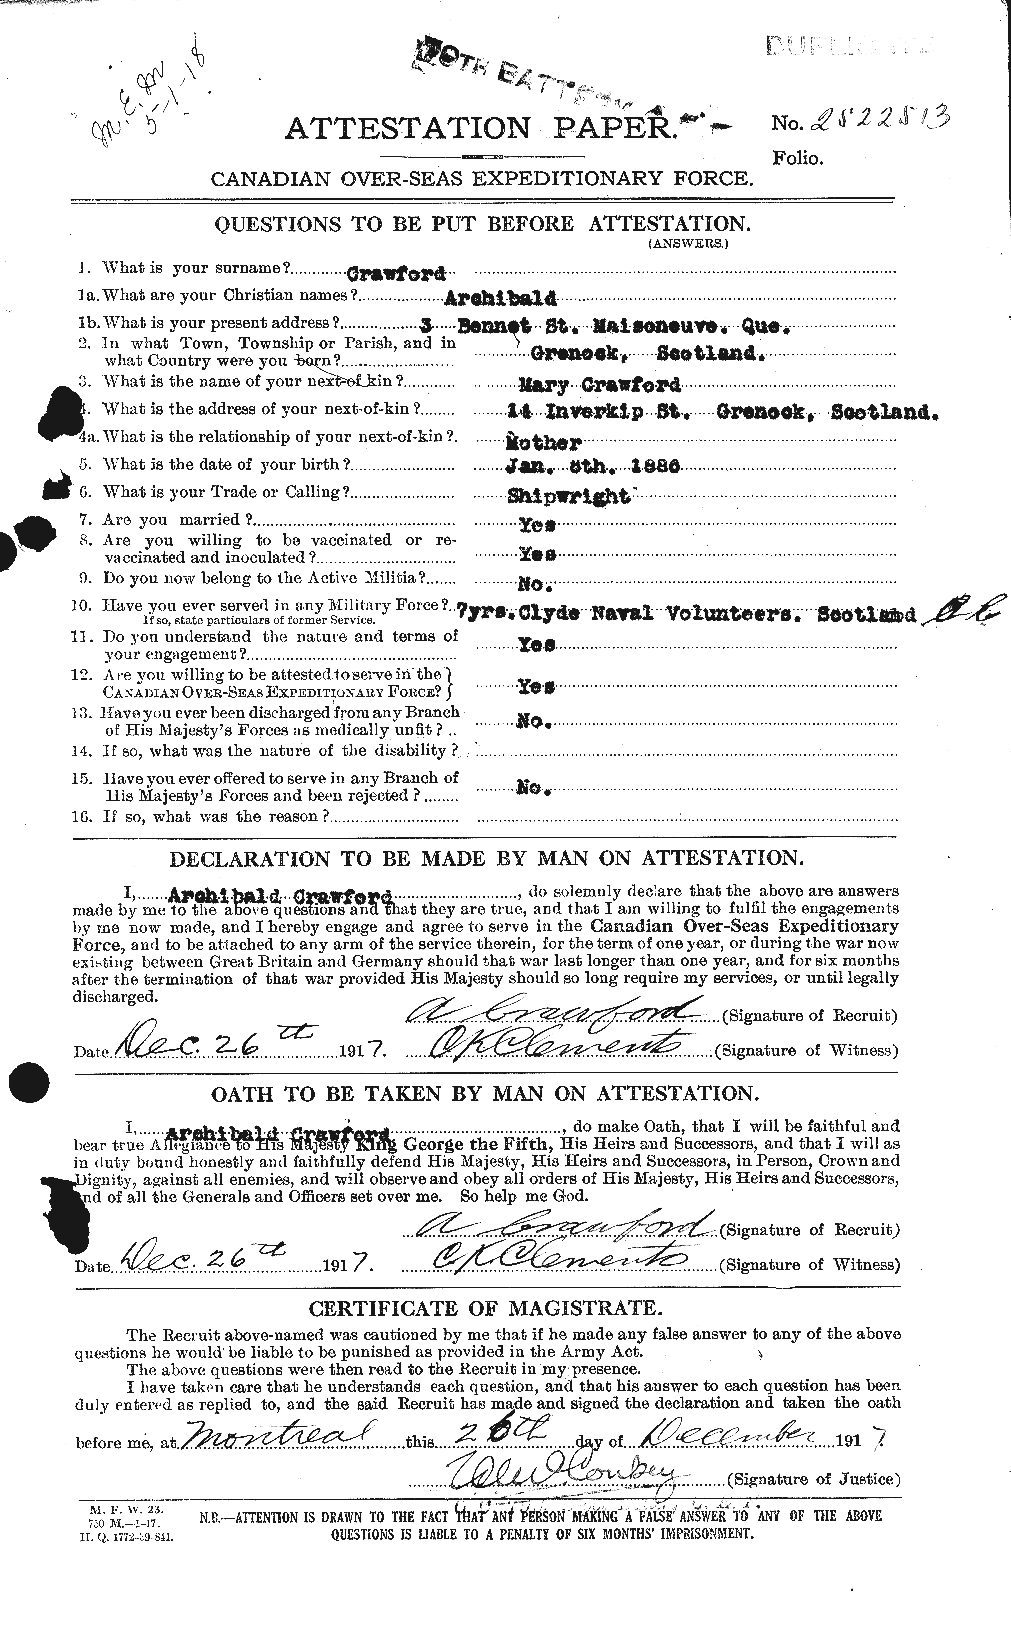 Personnel Records of the First World War - CEF 060935a